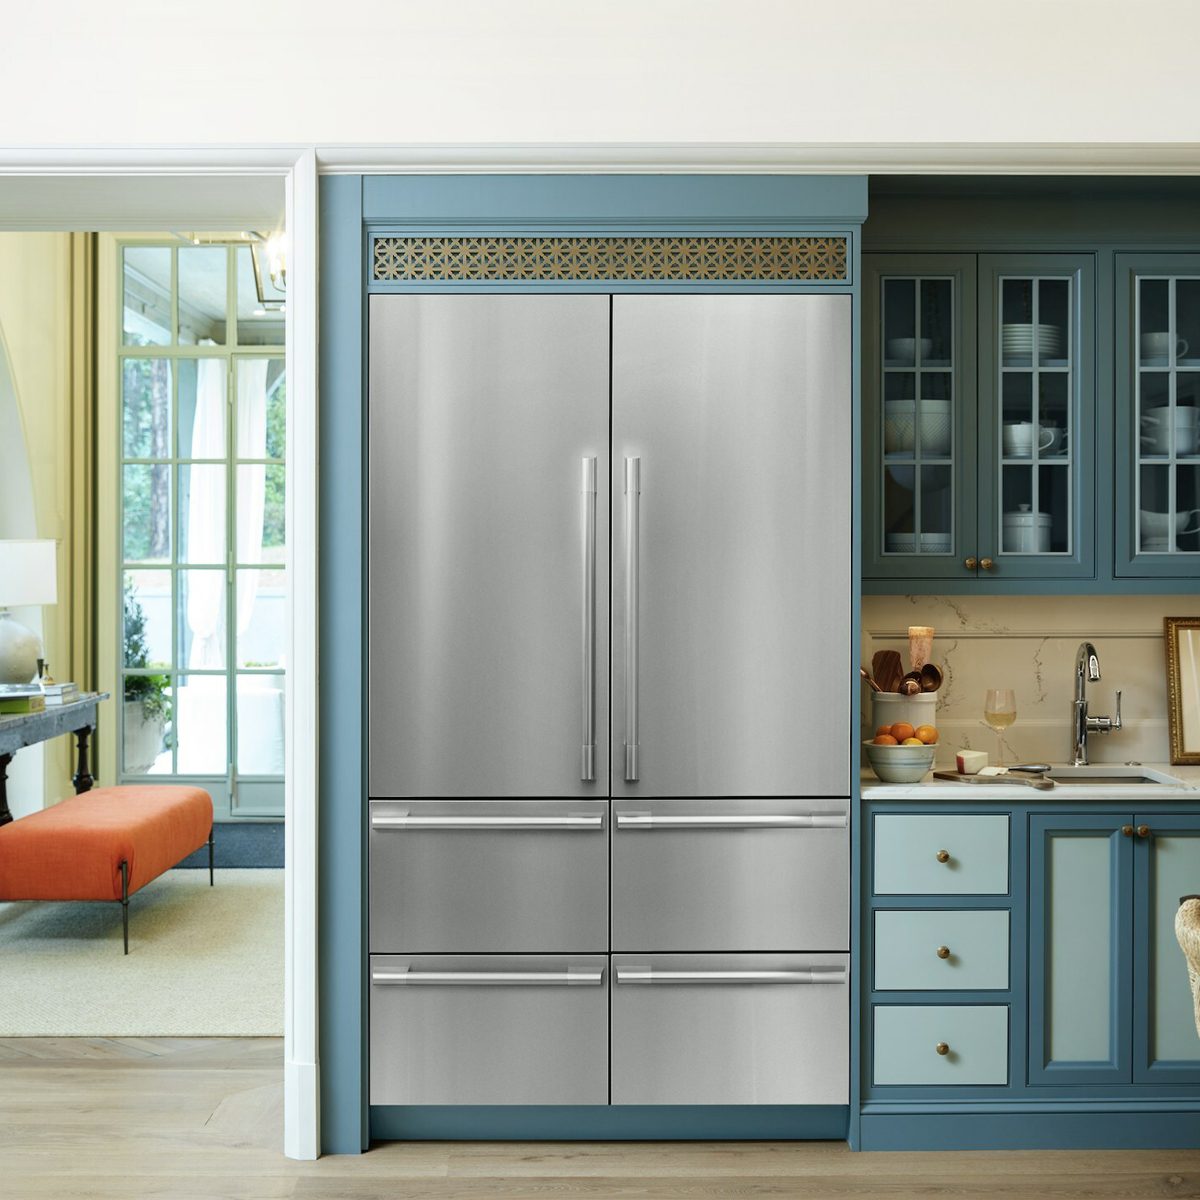 Signature Kitchen Suites First Of Its Kind 48 Inch Built In French Door Refrigerator Prnewswire.com  ?resize=522